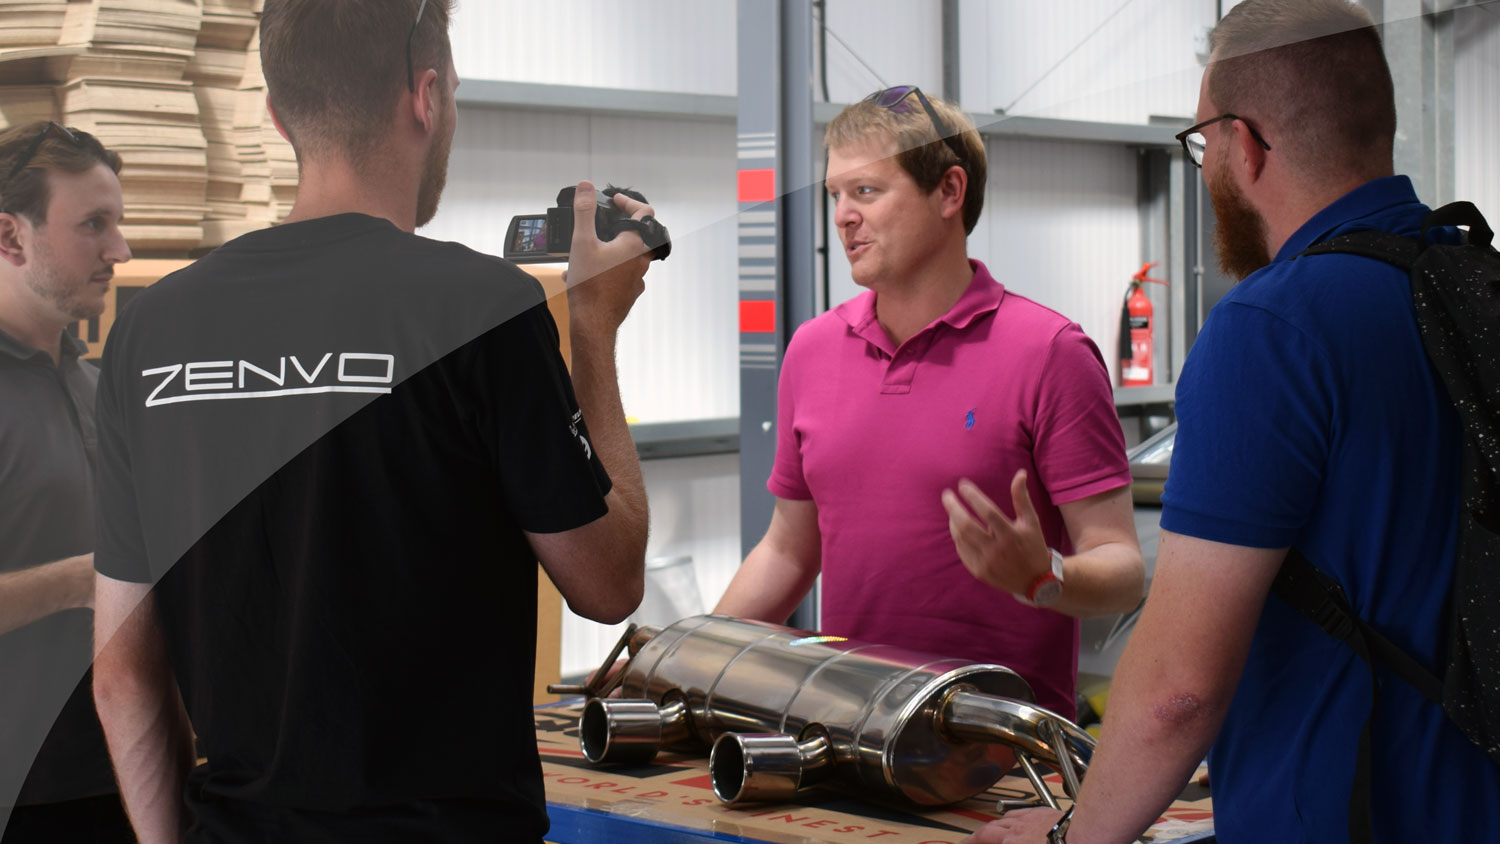 Shmee 150 visits us for his Clio V6 Exhaust Upgrade